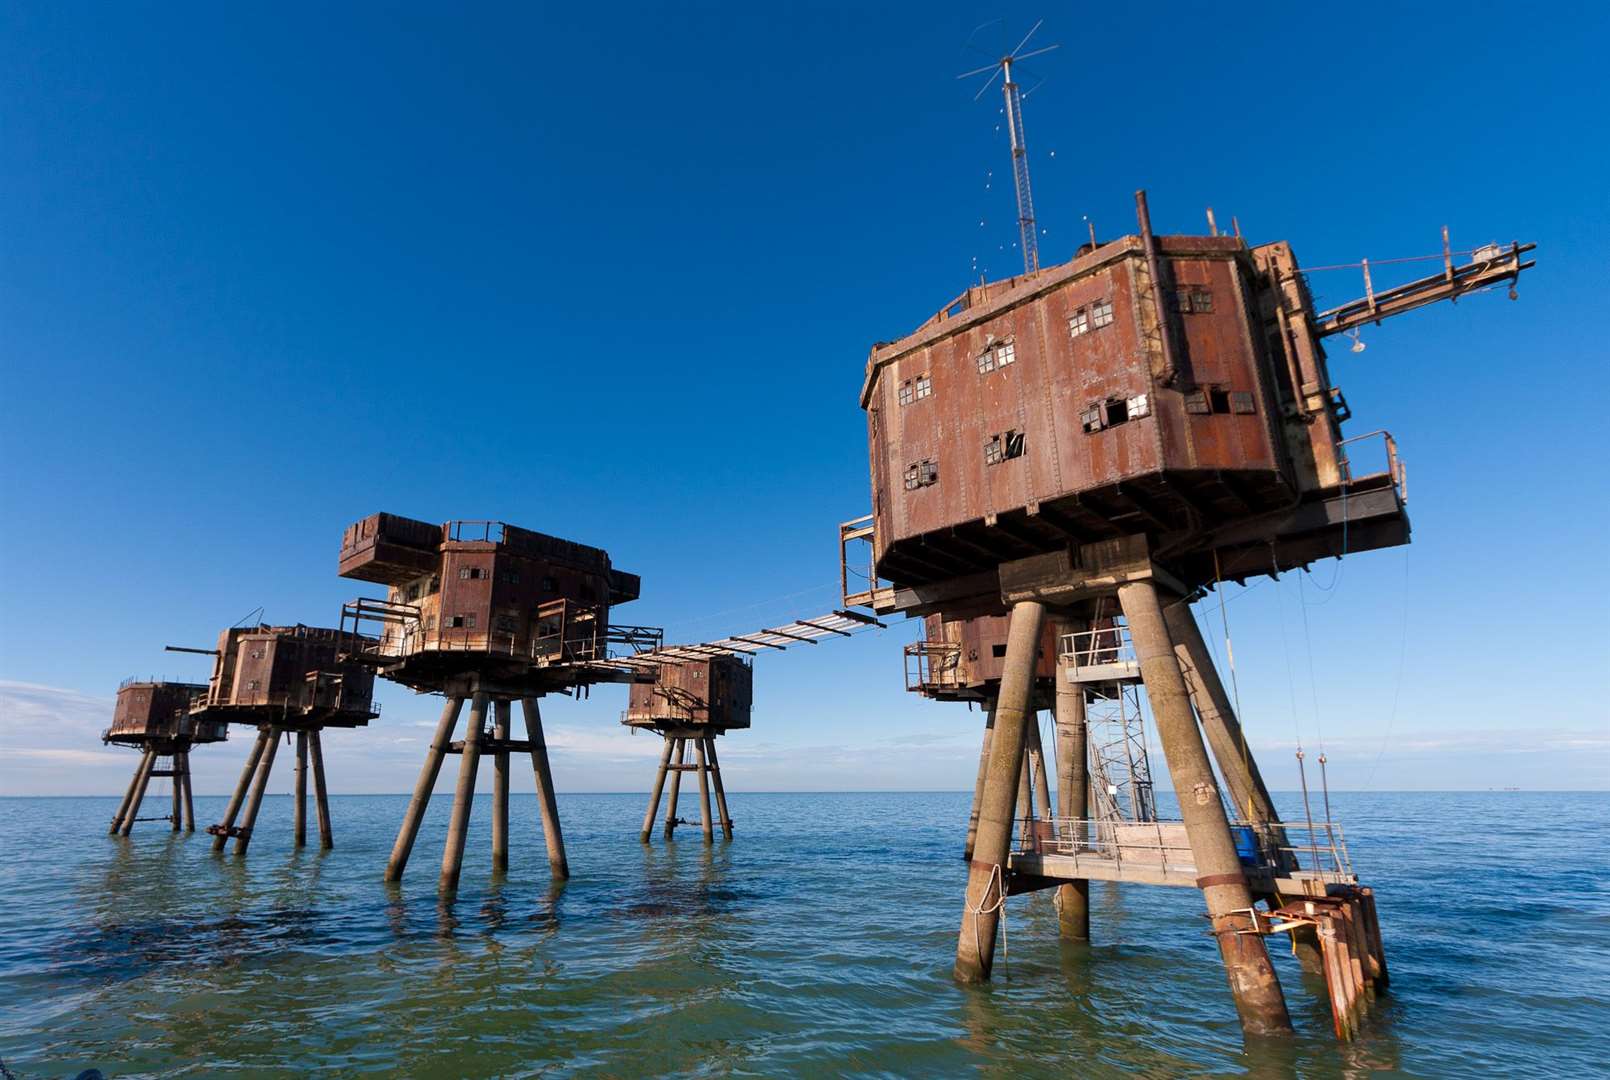 The Maunsell Forts off the Kent coast